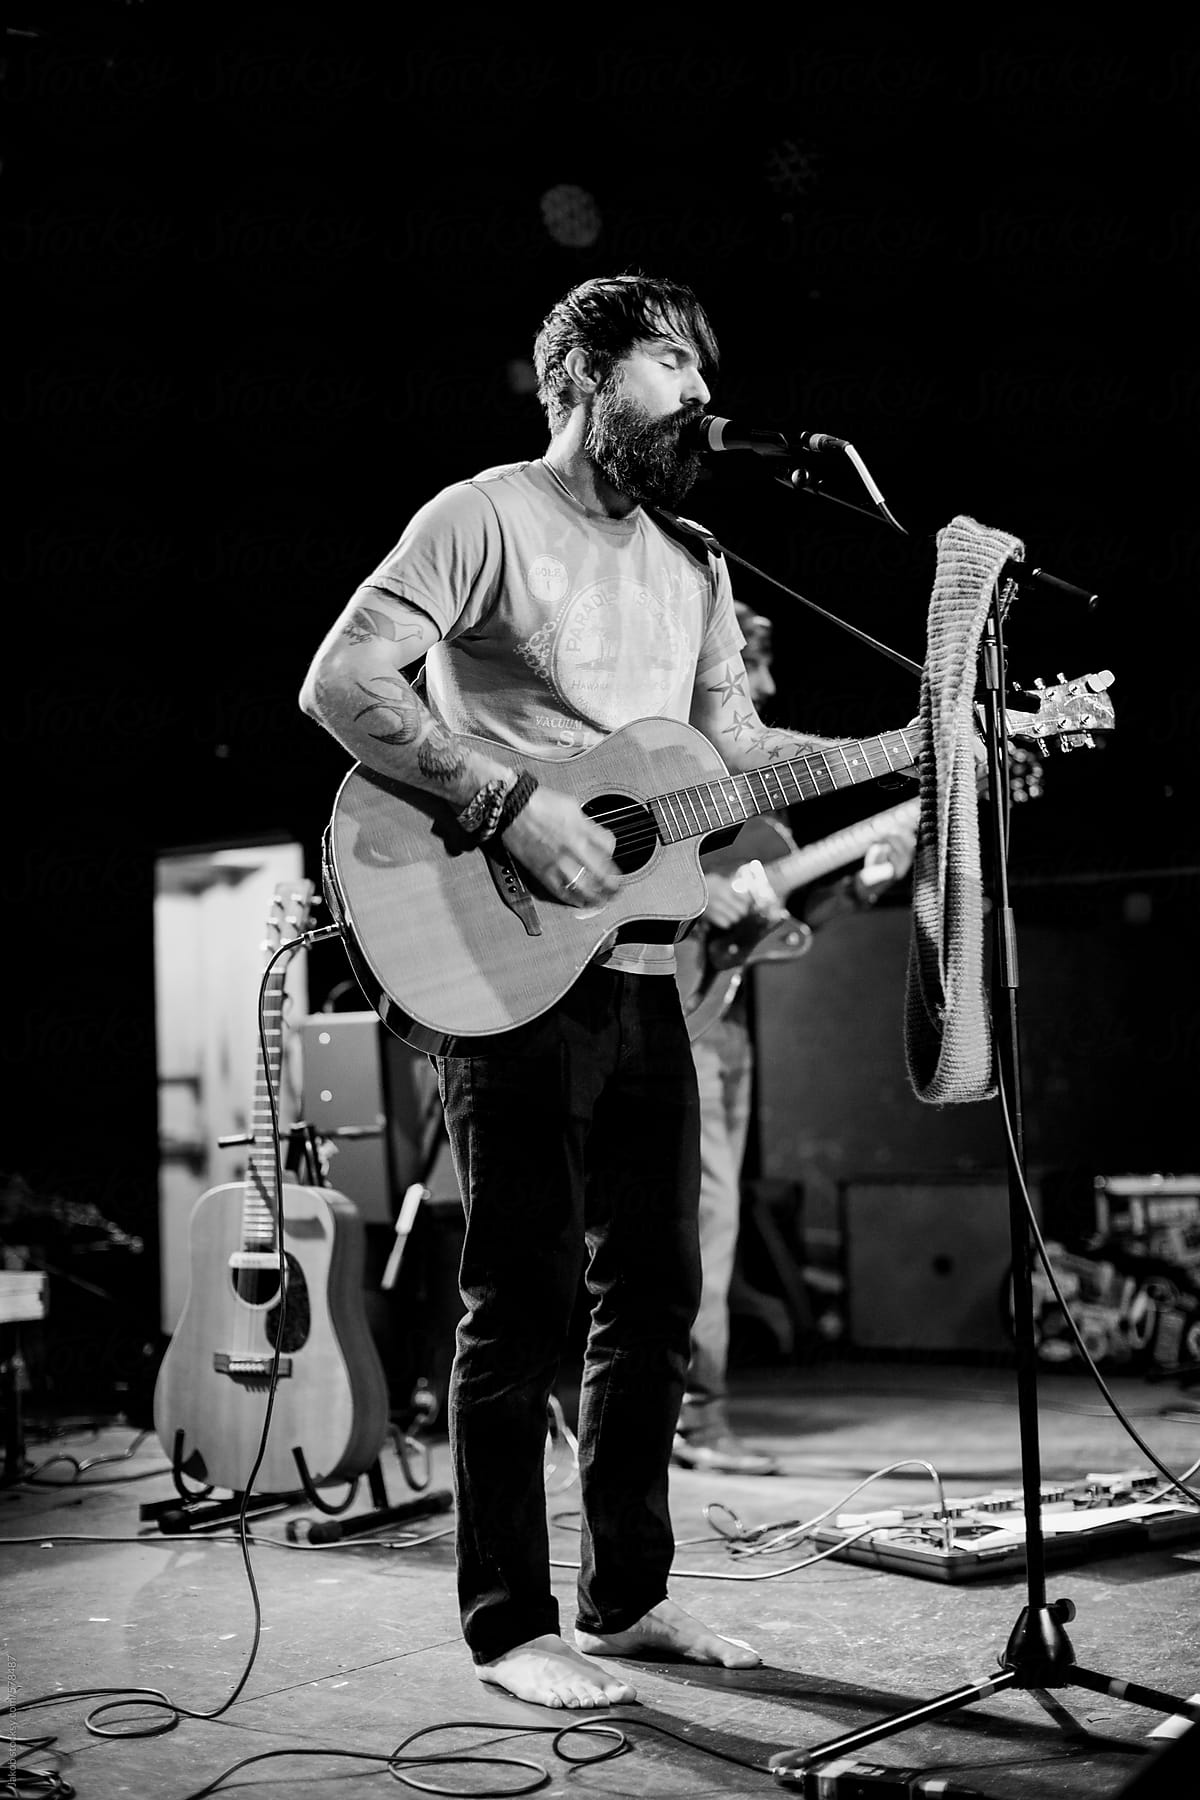 Bearded singer performs on a stage